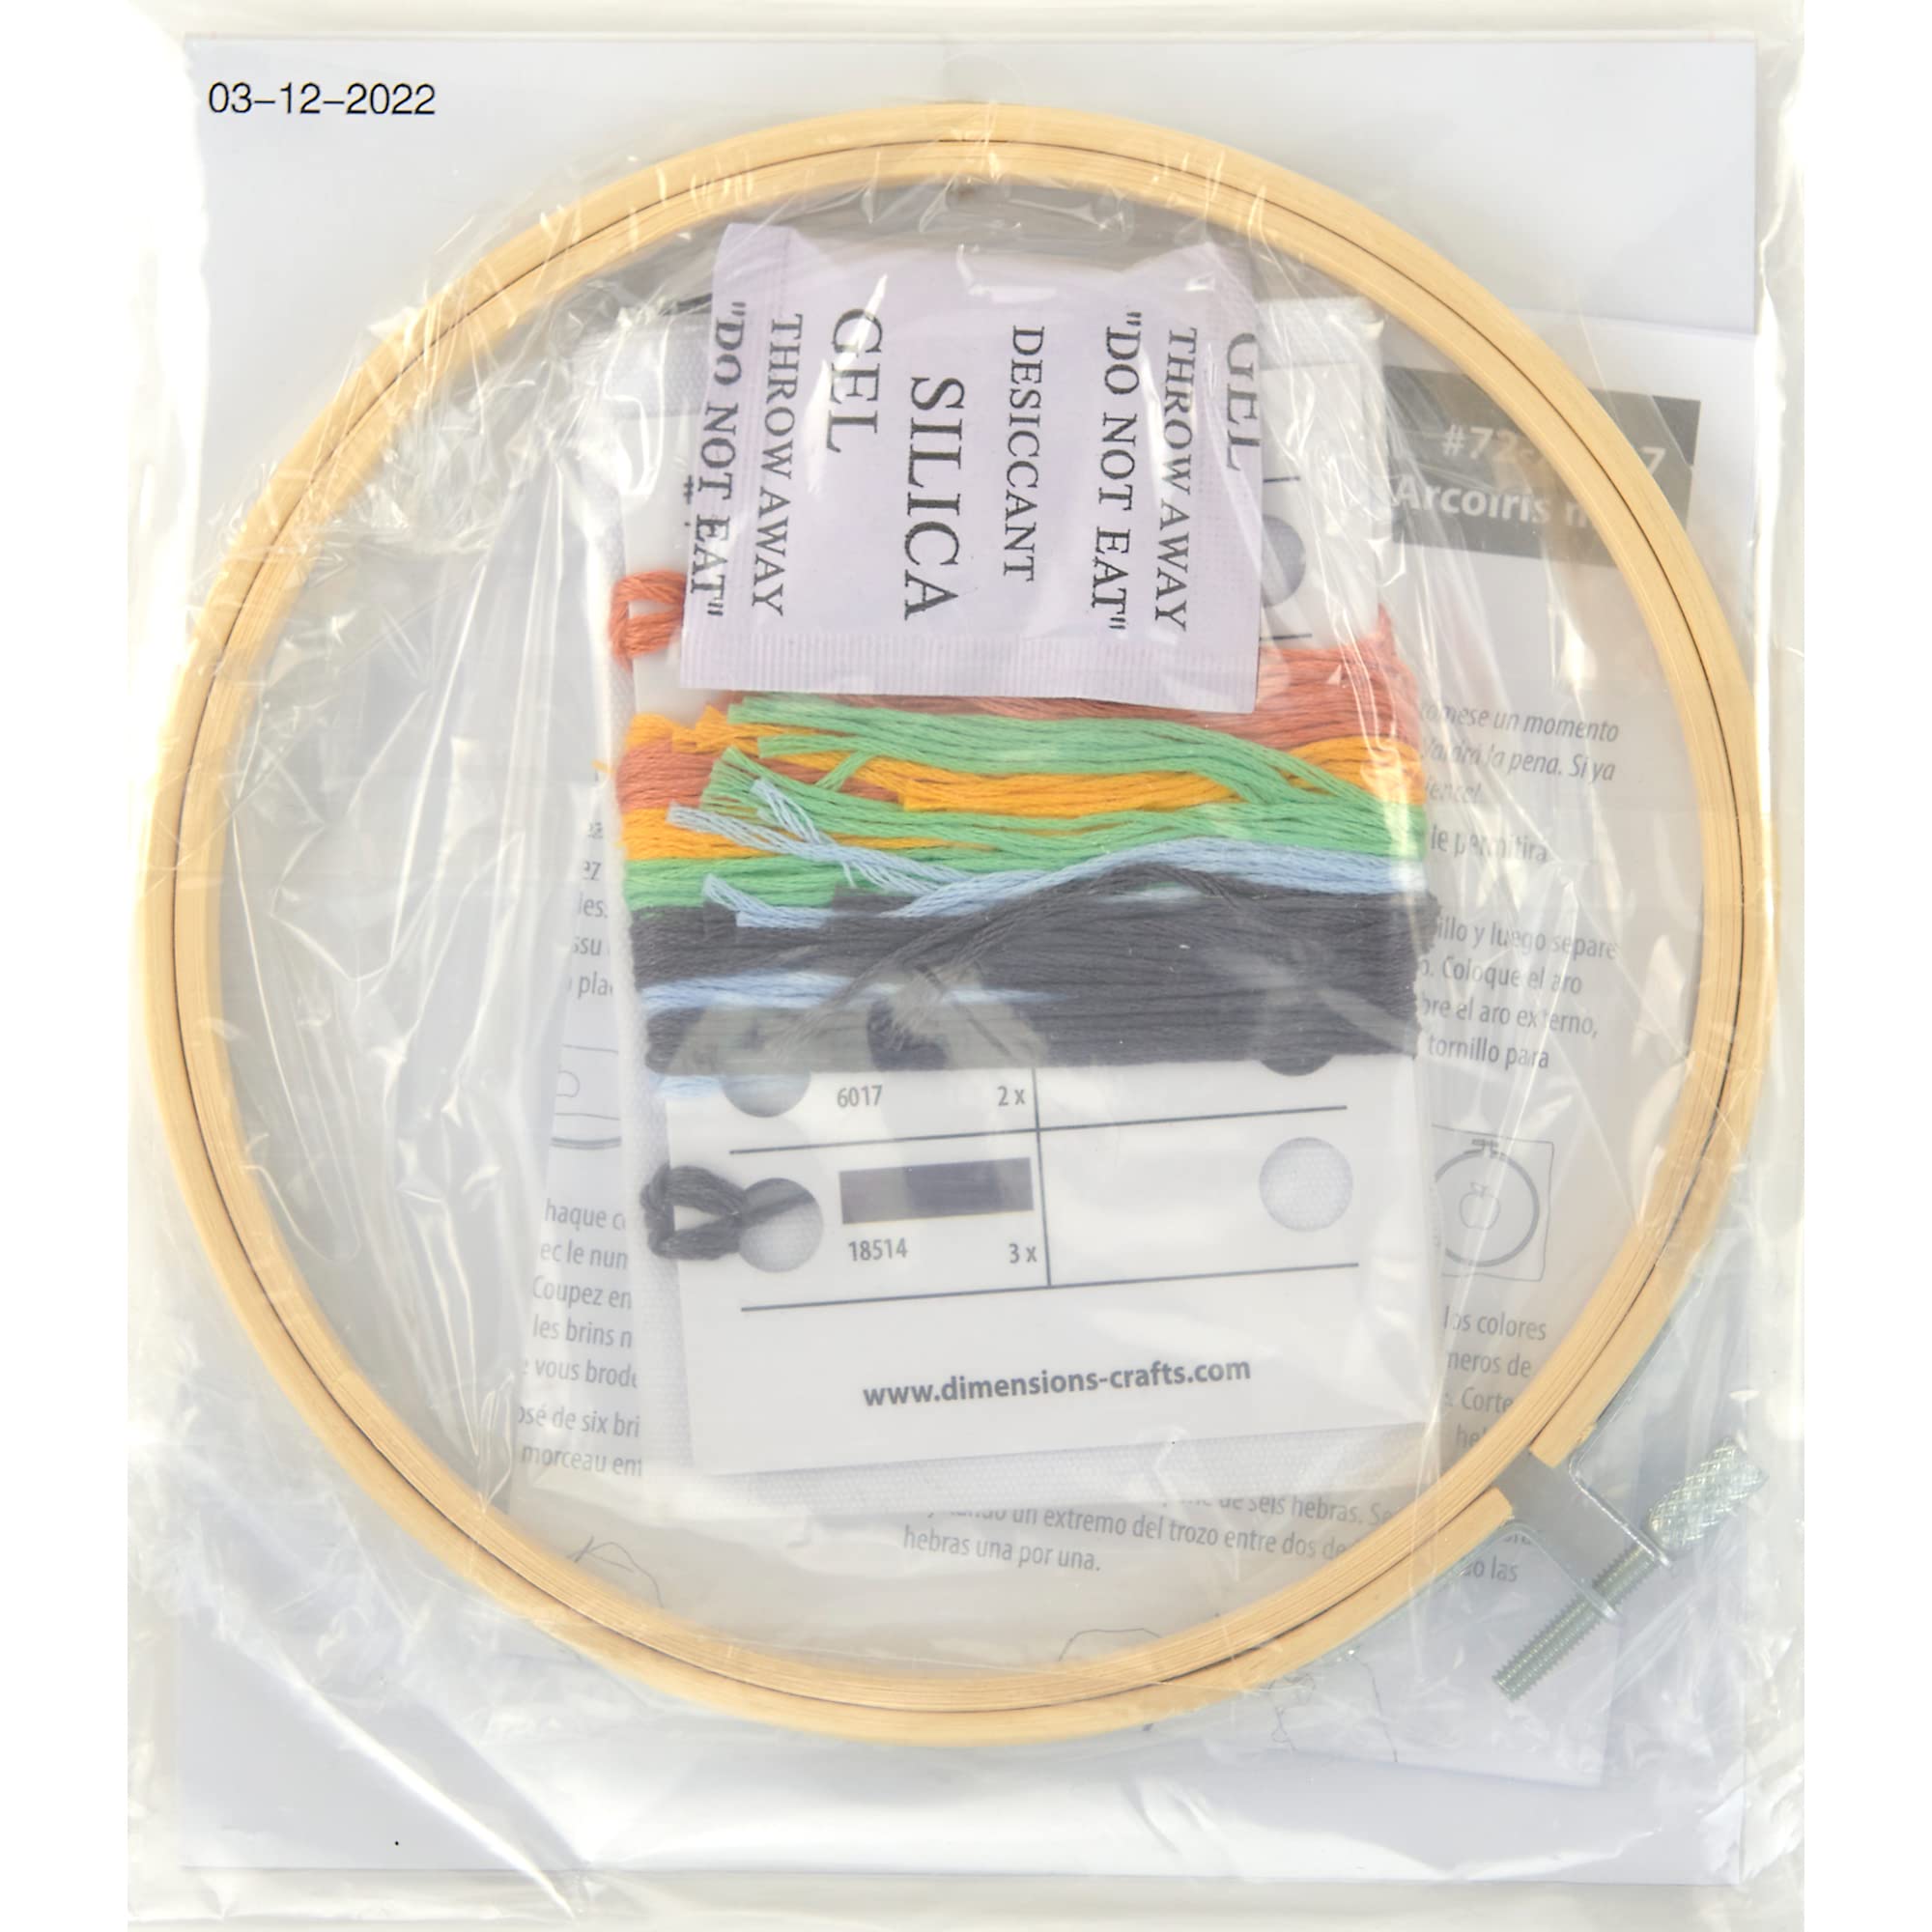 Dimensions 72-76917 Mod Rainbow Embroidery Needlepoint Kit for Beginners, 6